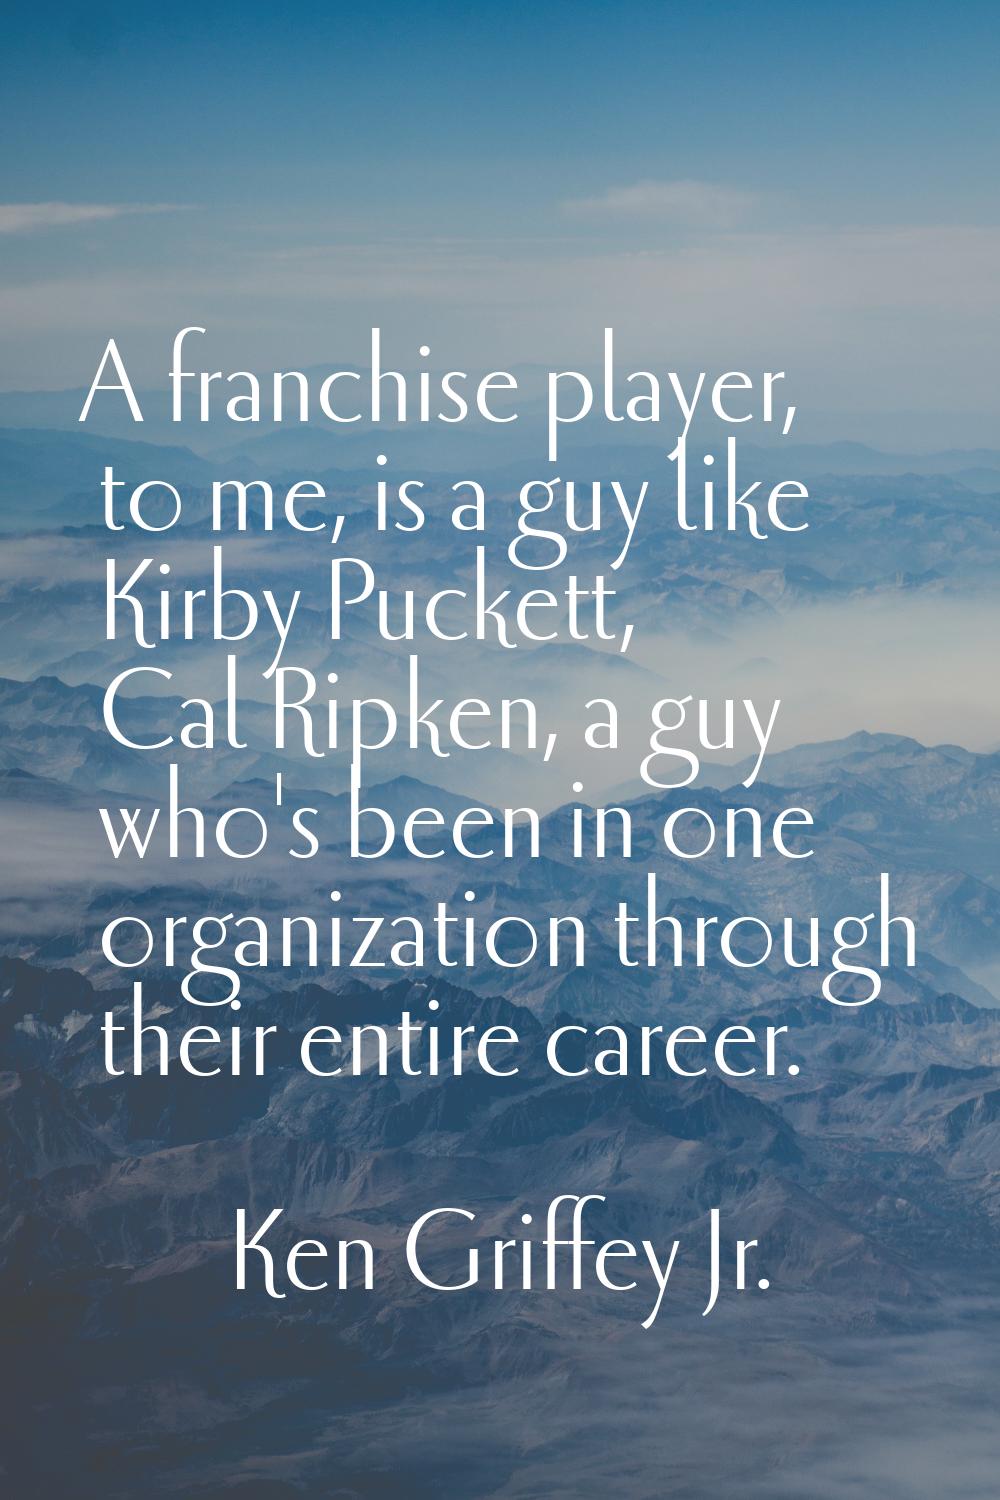 A franchise player, to me, is a guy like Kirby Puckett, Cal Ripken, a guy who's been in one organiz